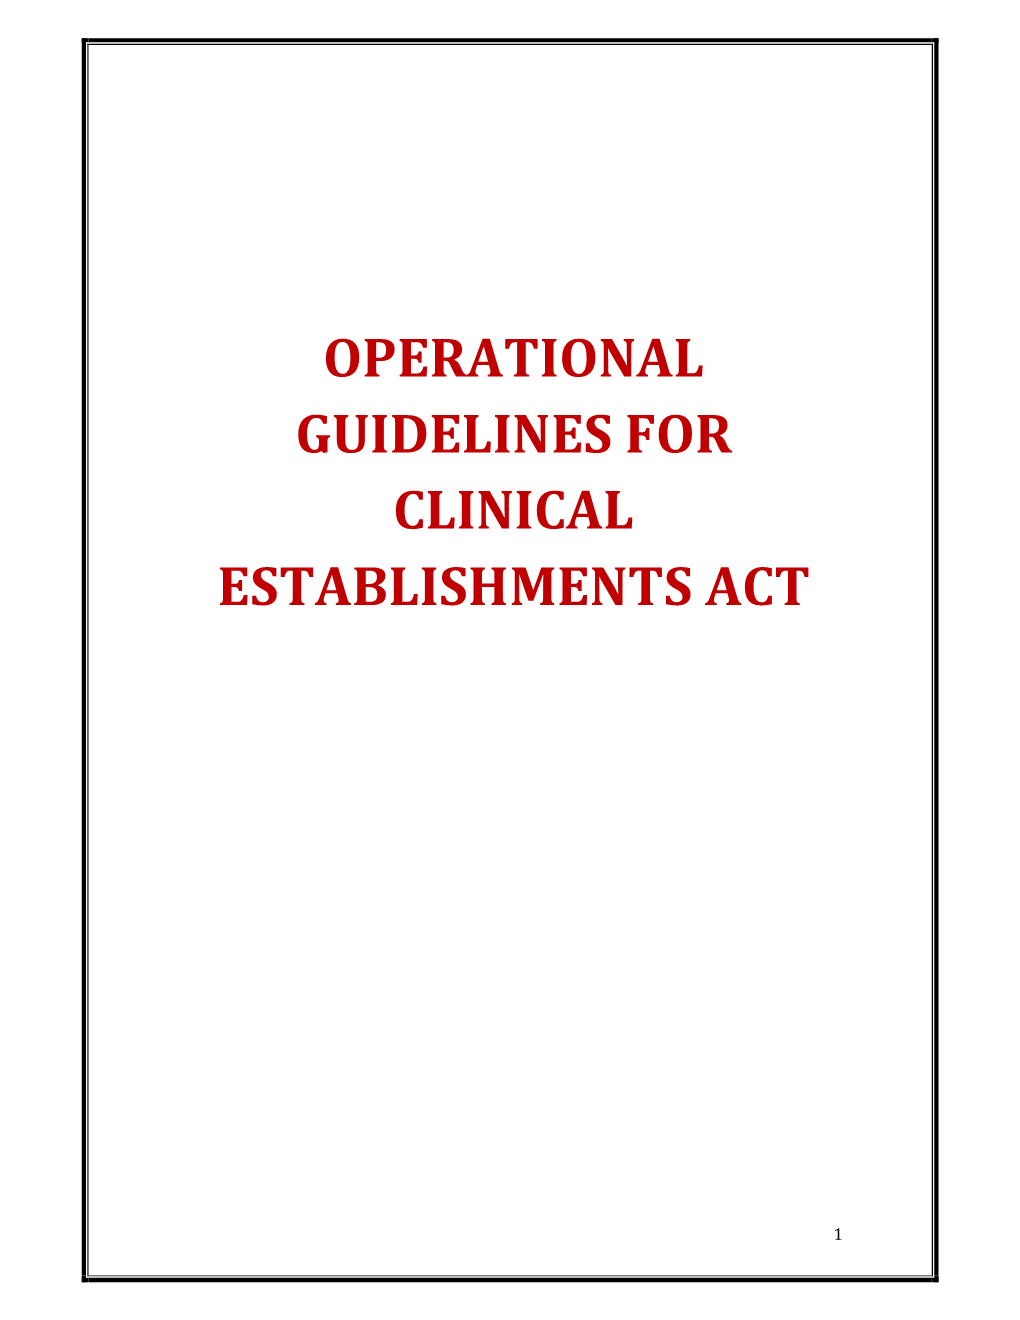 Operational Guidelines for Clinical Establishments Act